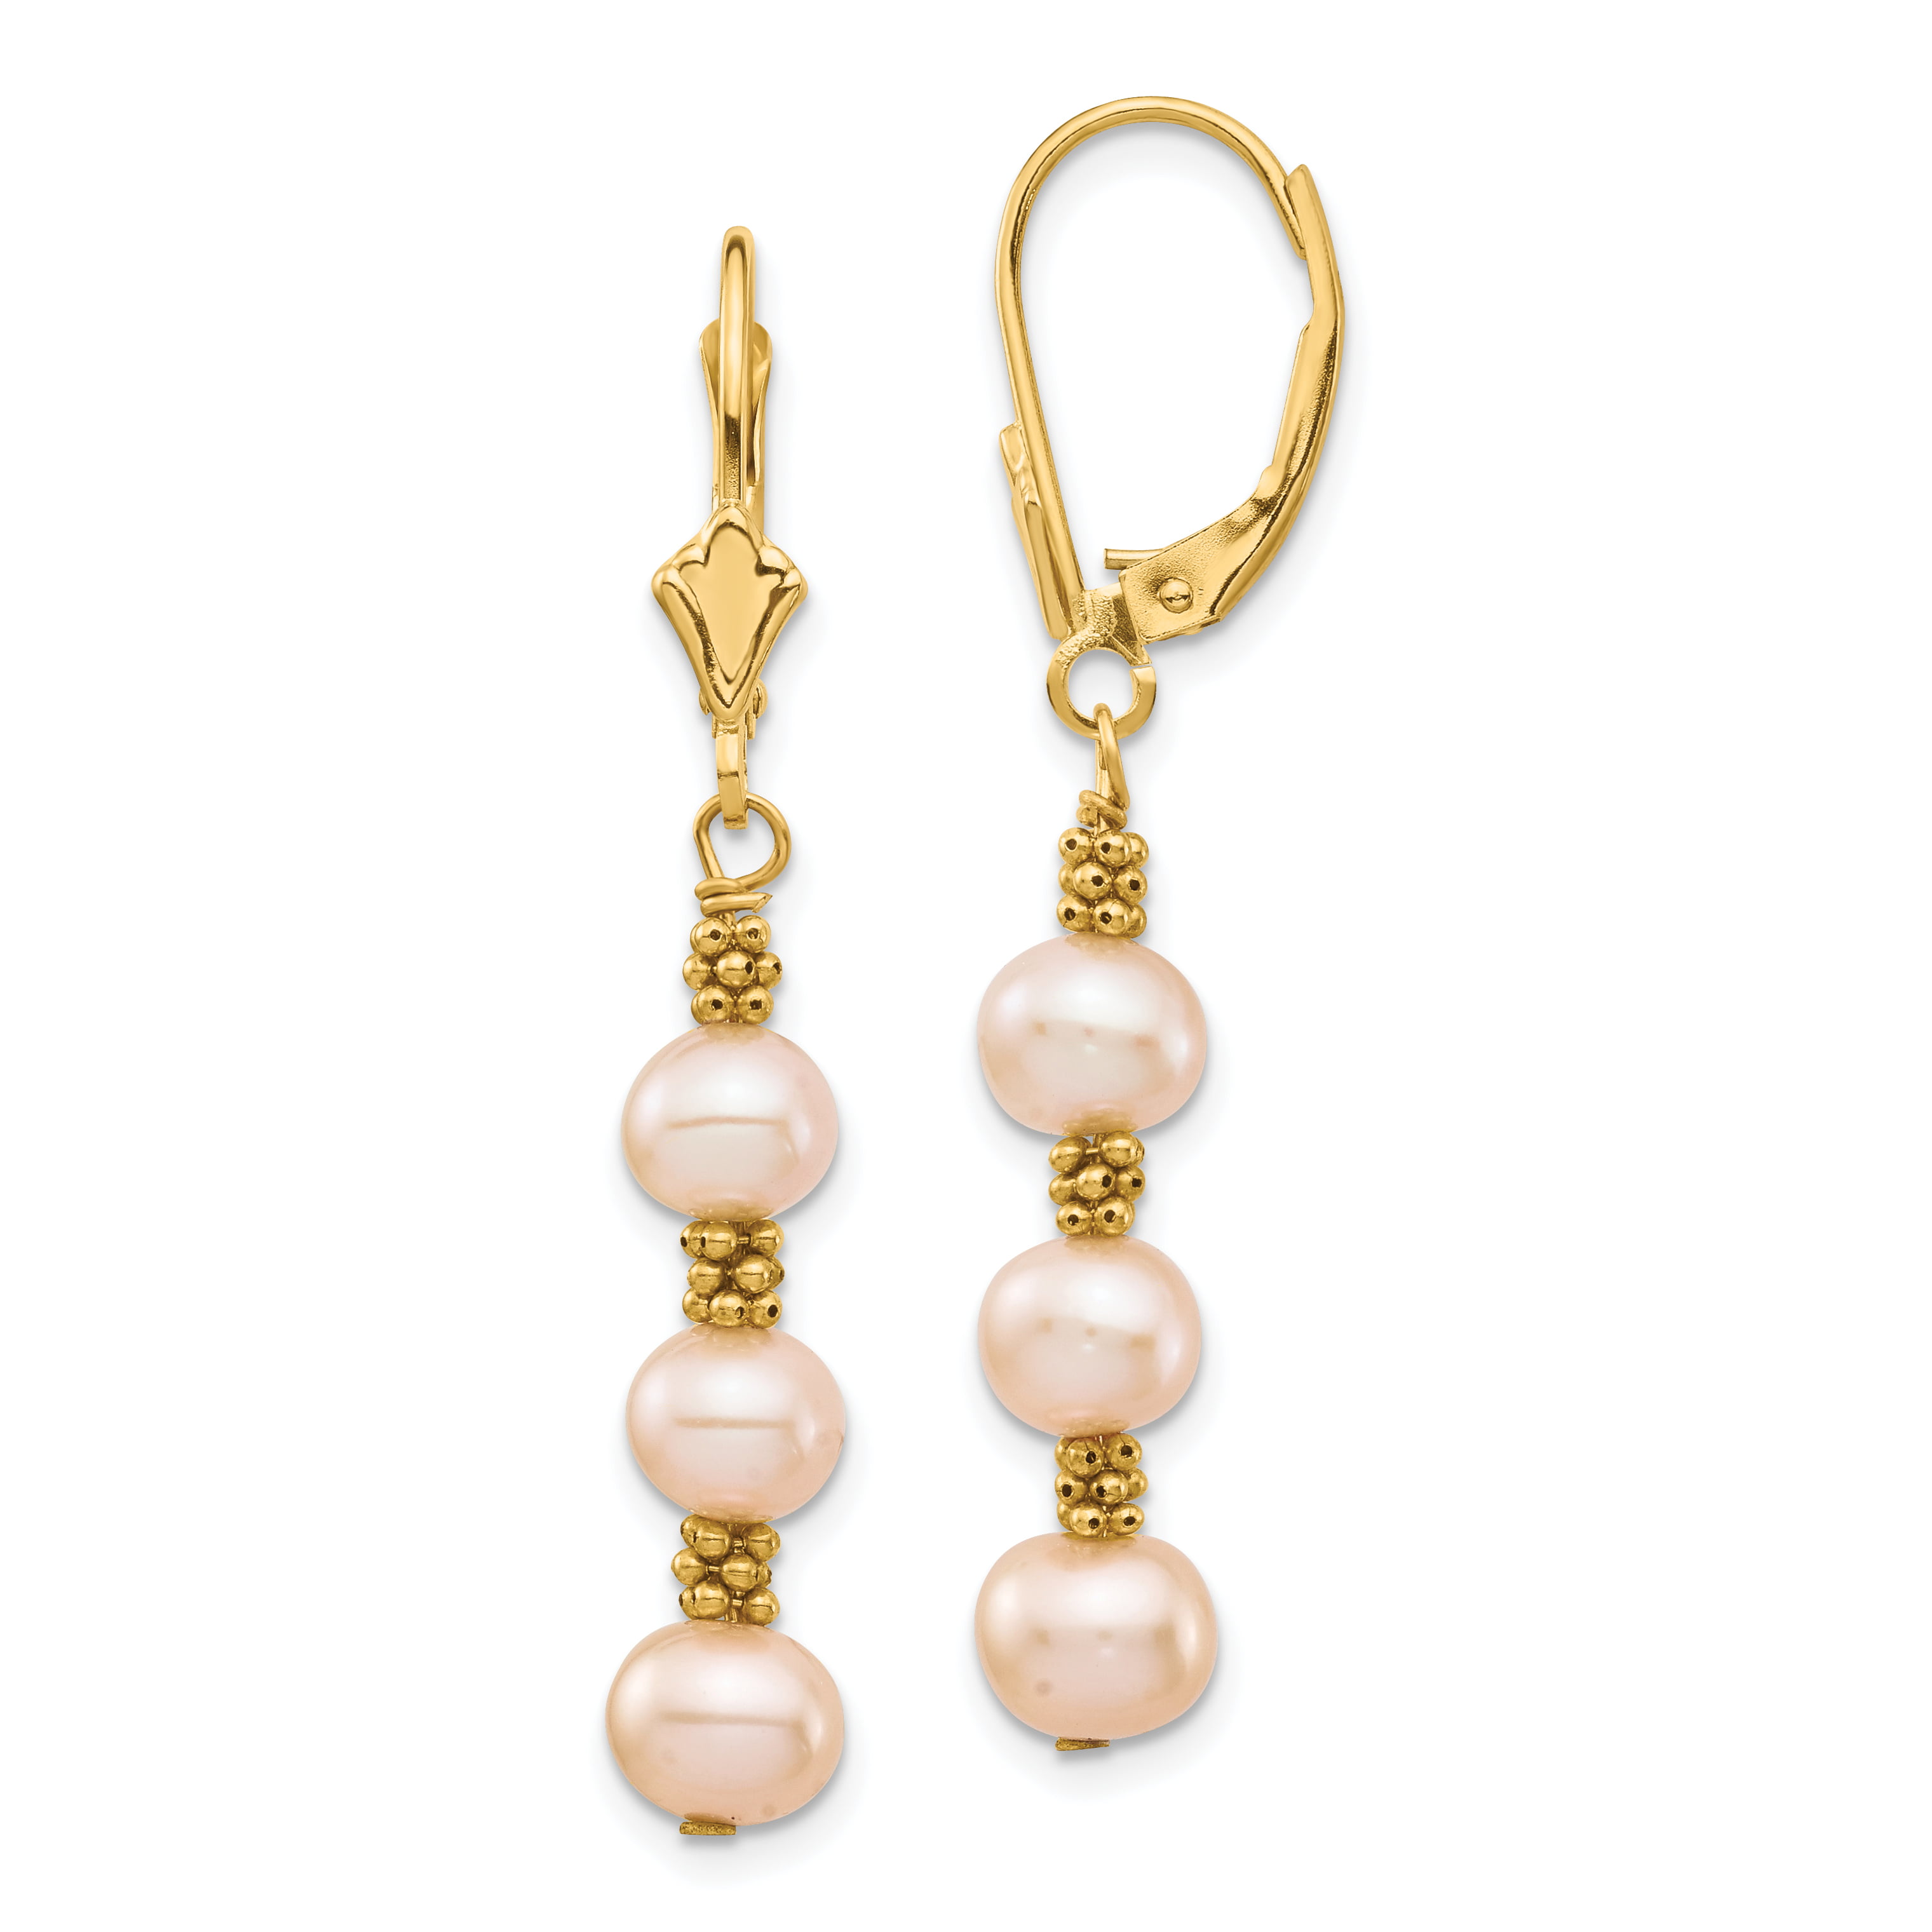 Details about   AAA 6-7mm real natural akoya white bread pearl earrings 14k Yellow Gold 